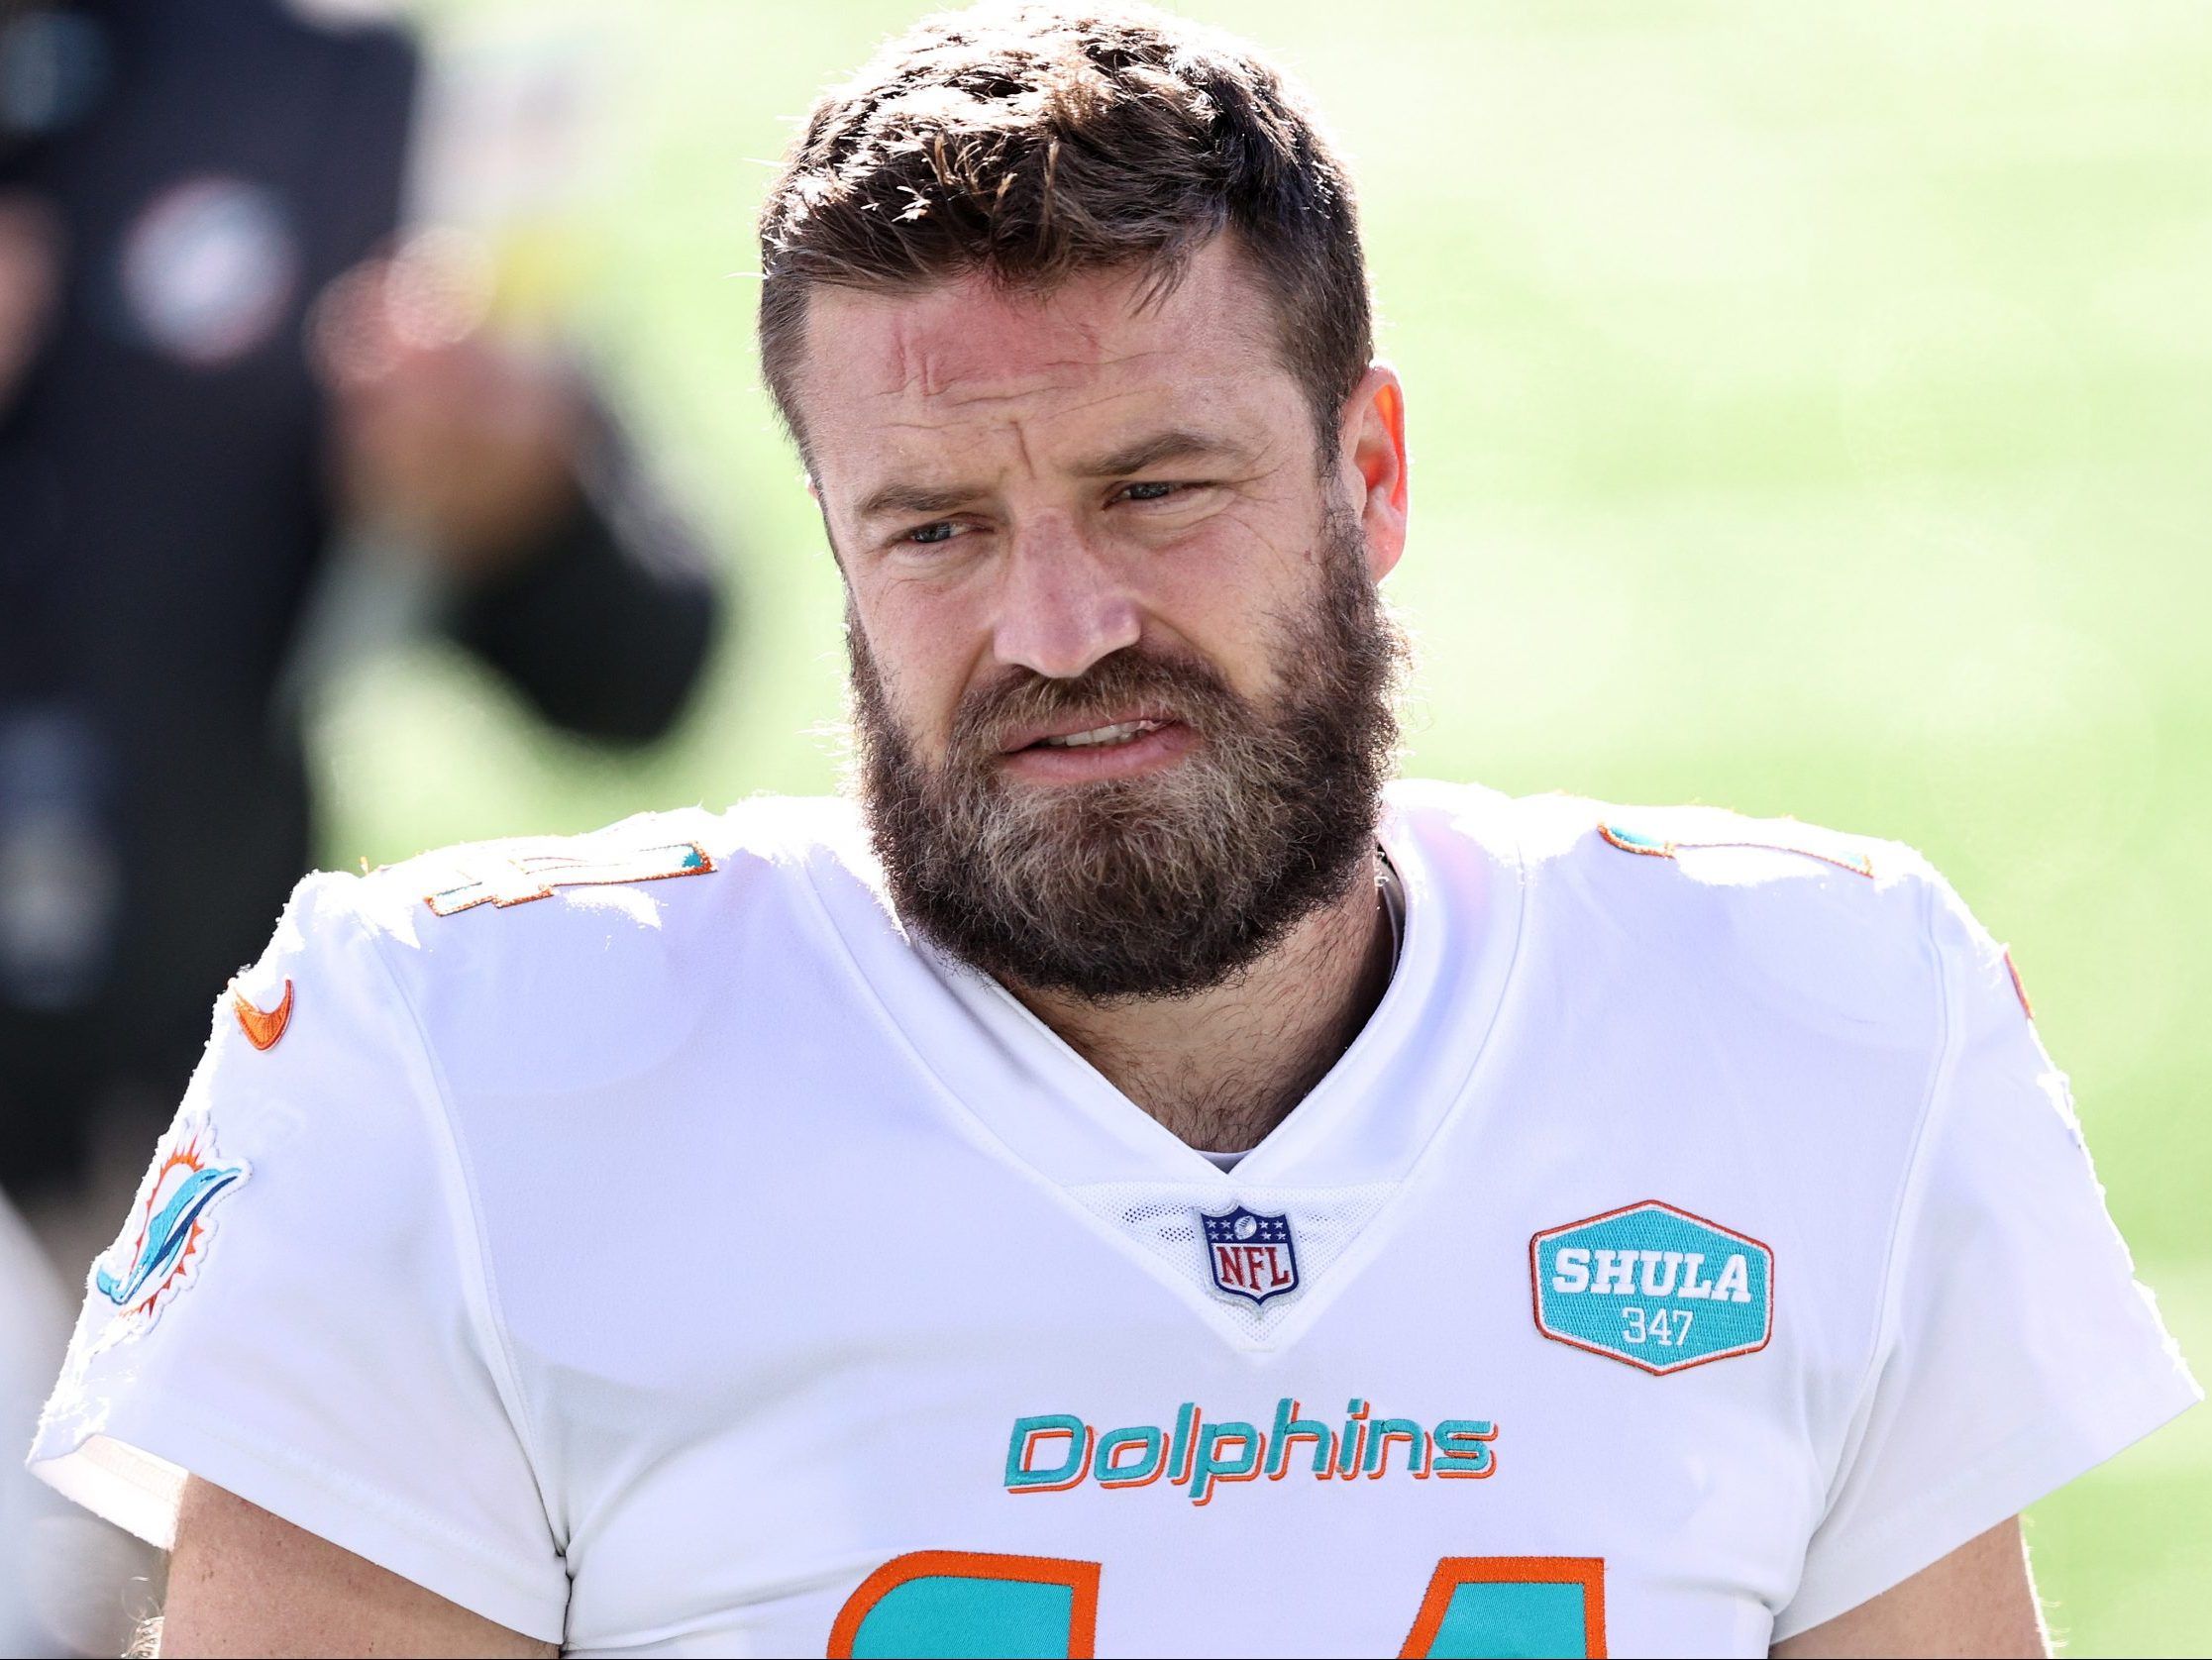 Dolphins QB Ryan Fitzpatrick tests positive for COVID-19